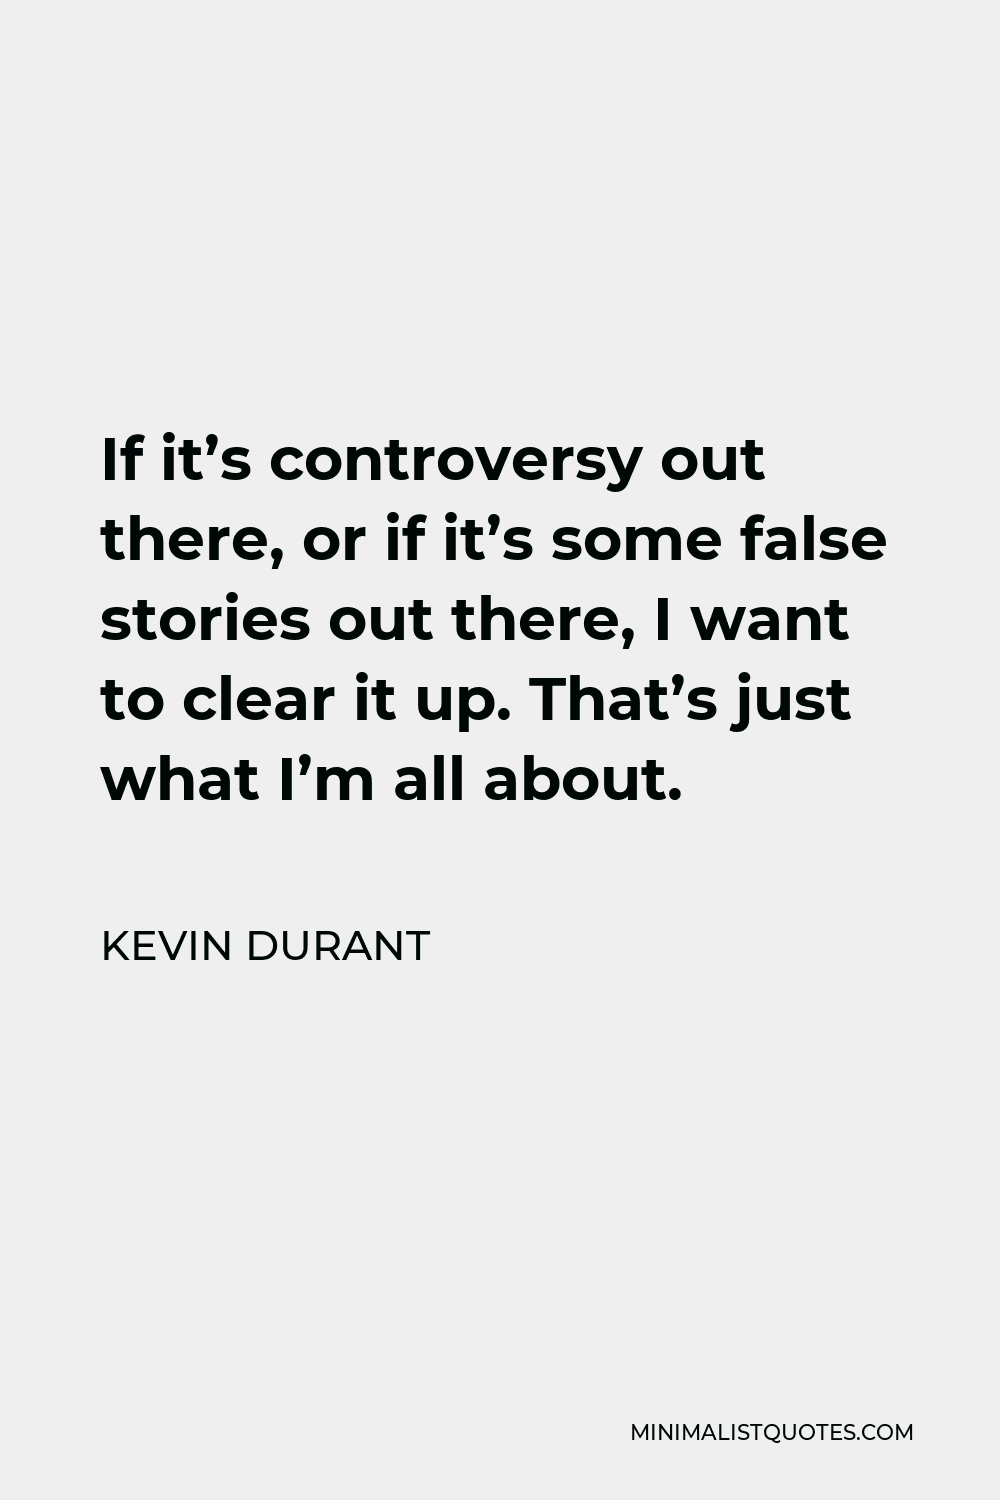 Kevin Durant Quote - If it’s controversy out there, or if it’s some false stories out there, I want to clear it up. That’s just what I’m all about.